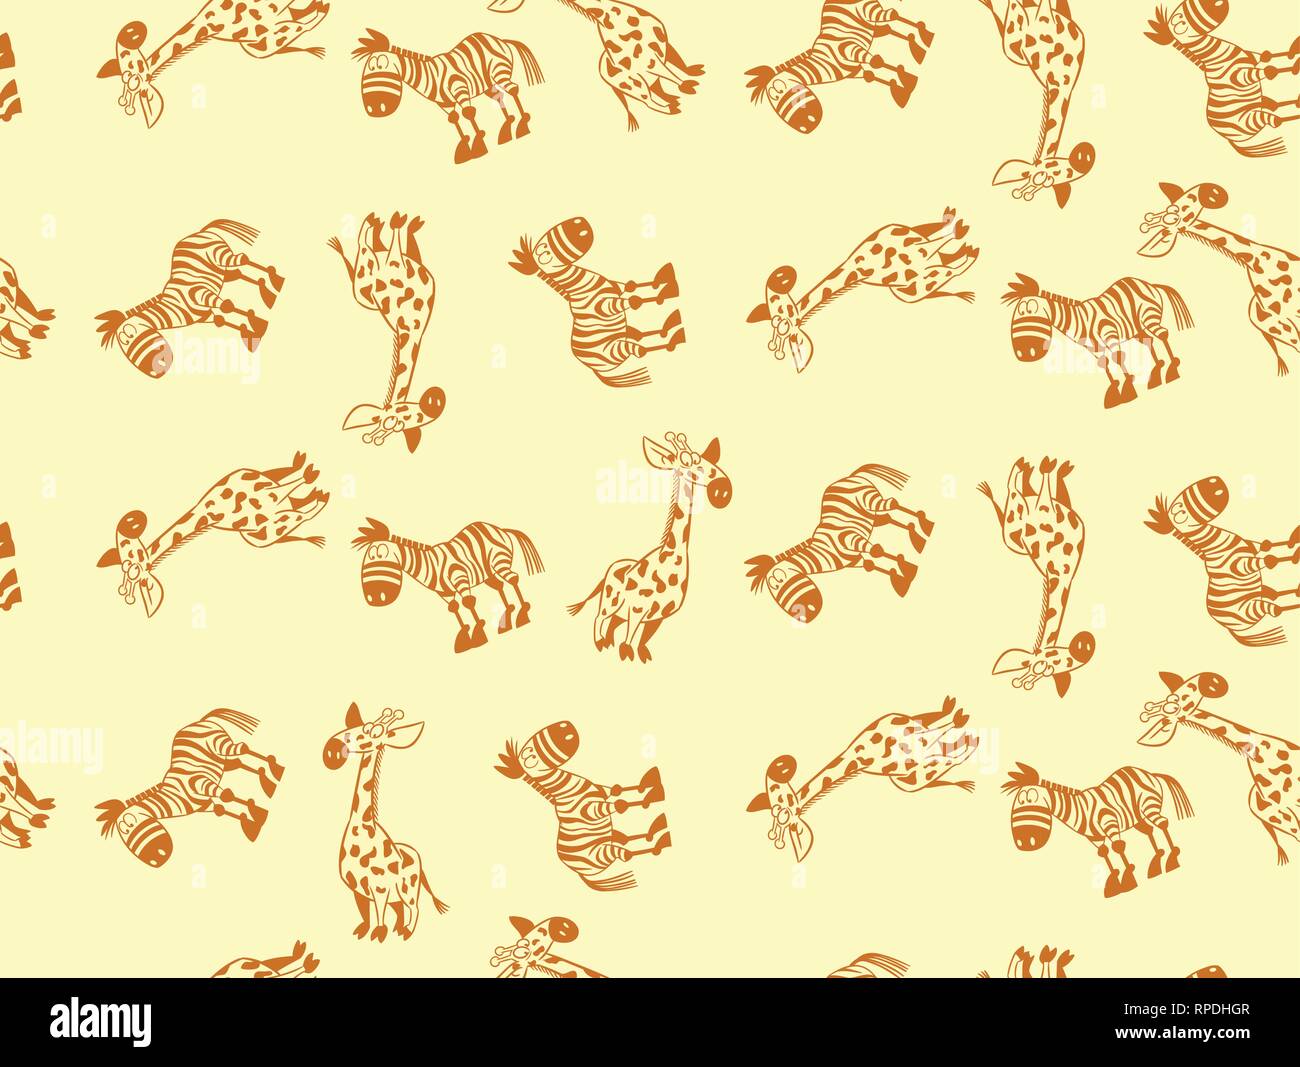 Vector seamless pattern with cartoon animals. This is a funny giraffe and zebra in orange colors. Stock Vector